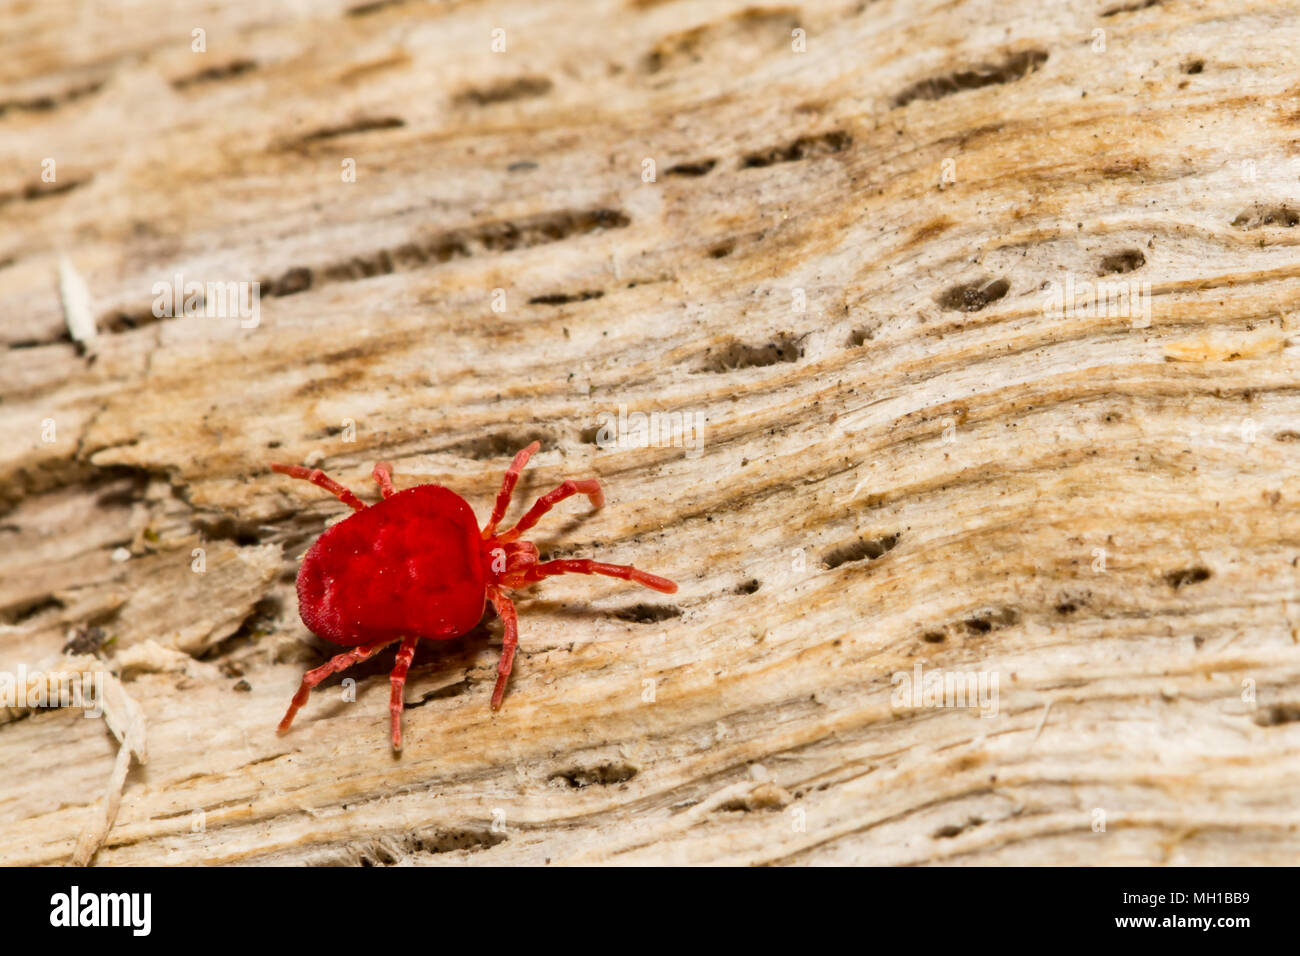 A Red Velvet Mite foraging for termite swarmers Stock Photo